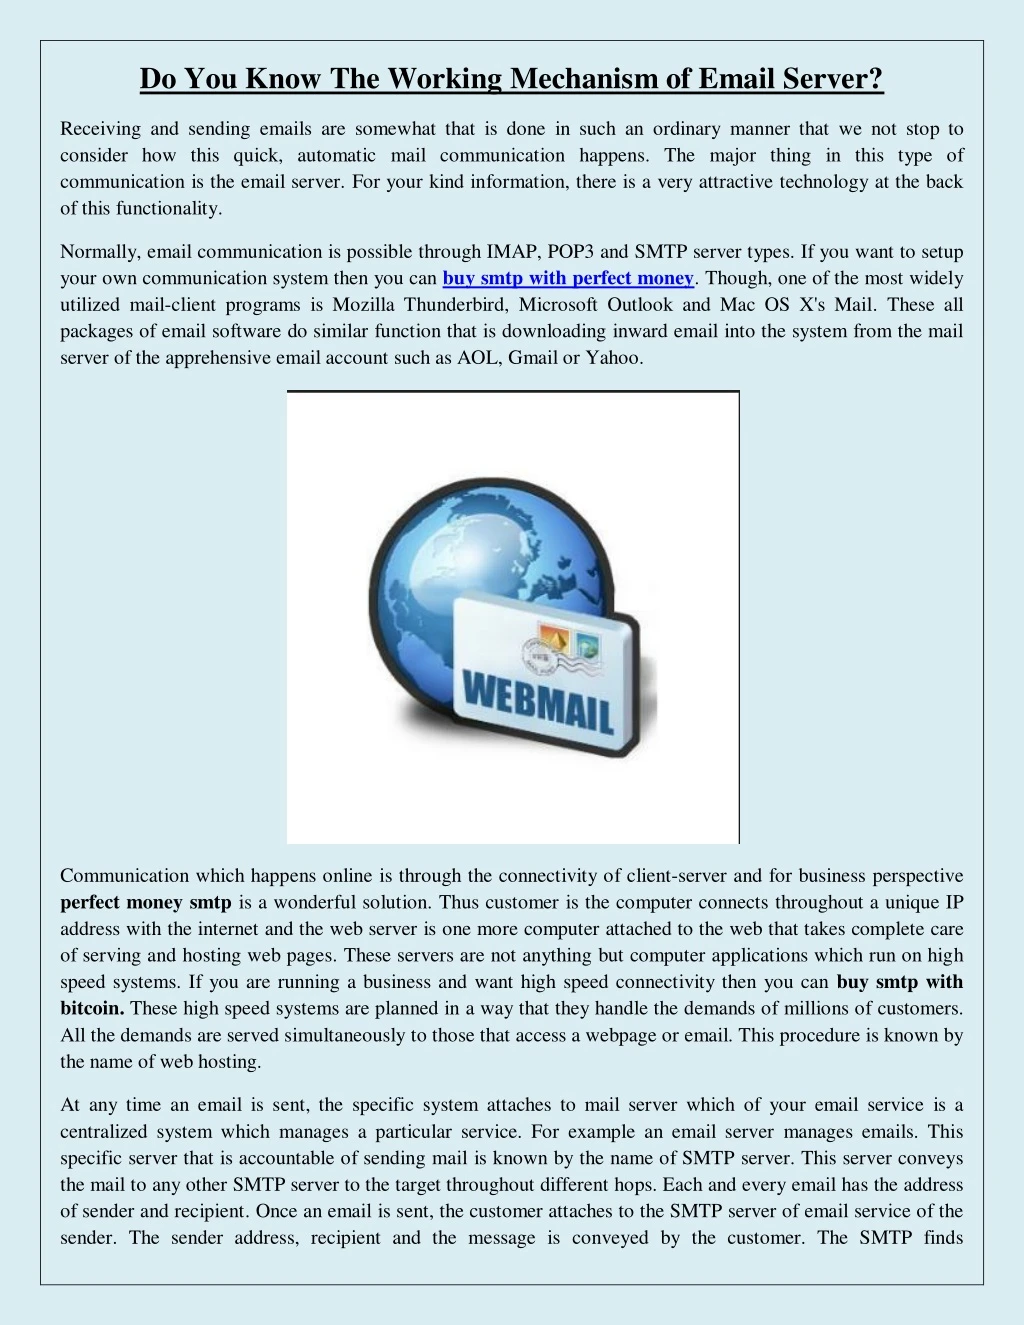 do you know the working mechanism of email server